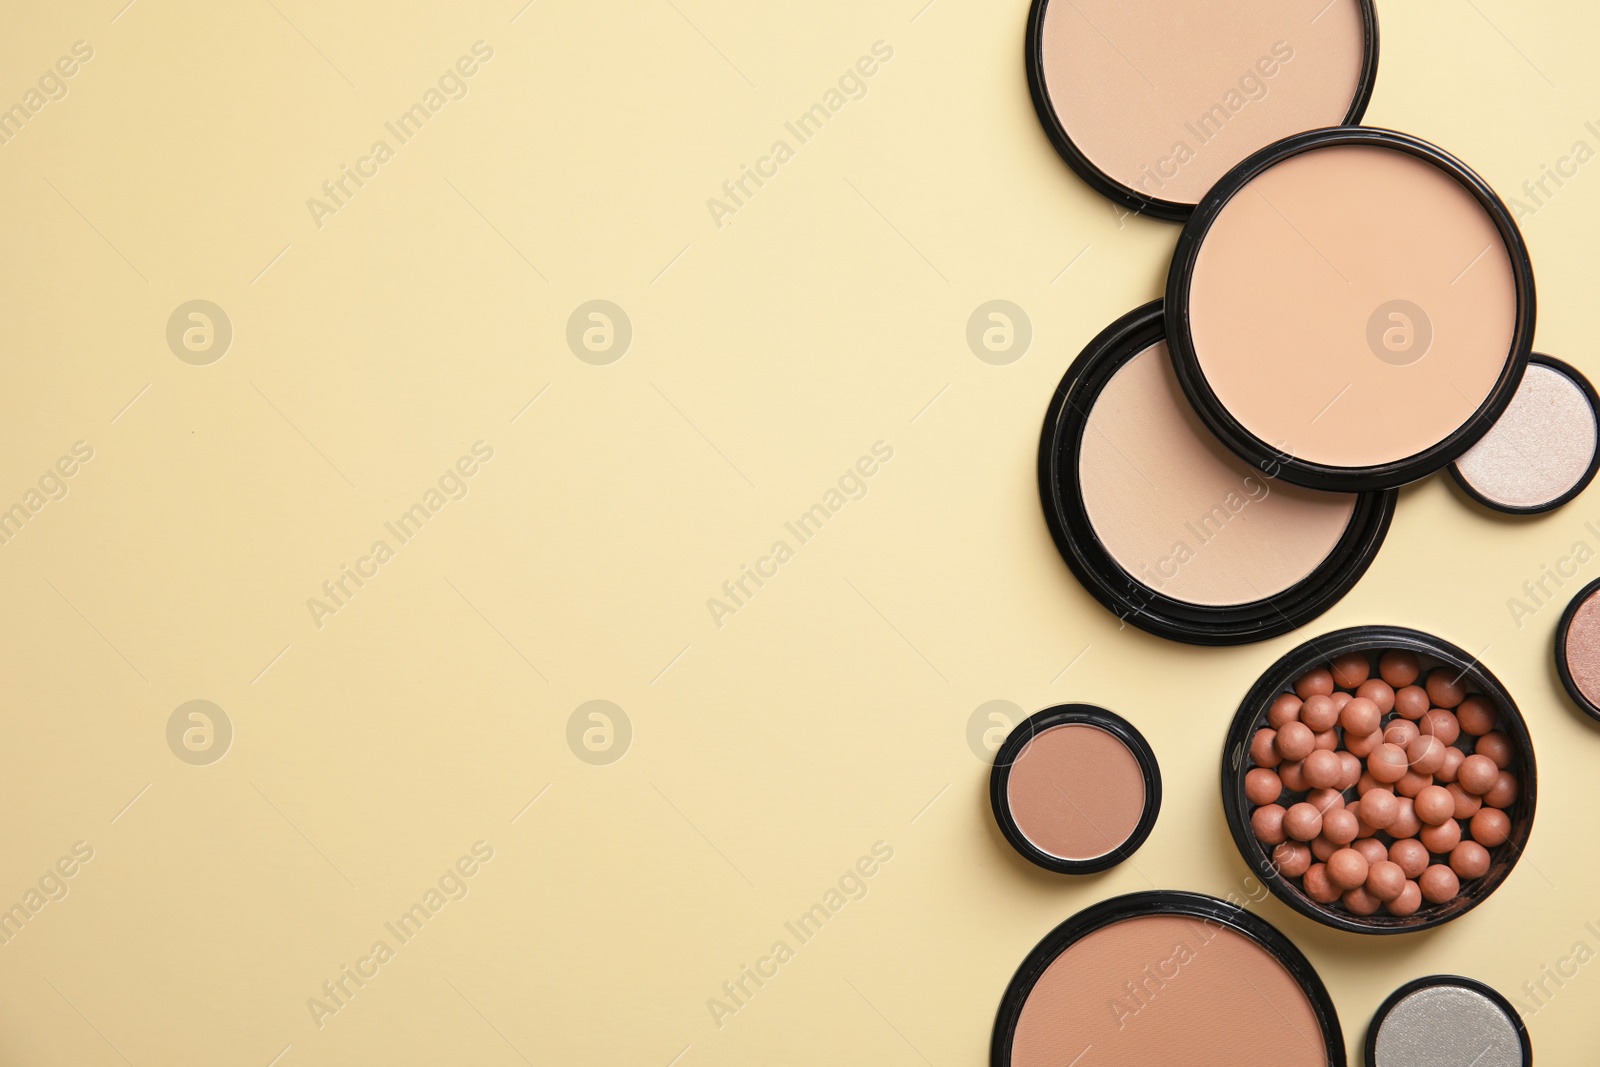 Photo of Flat lay composition with various makeup face powders on color background. Space for text